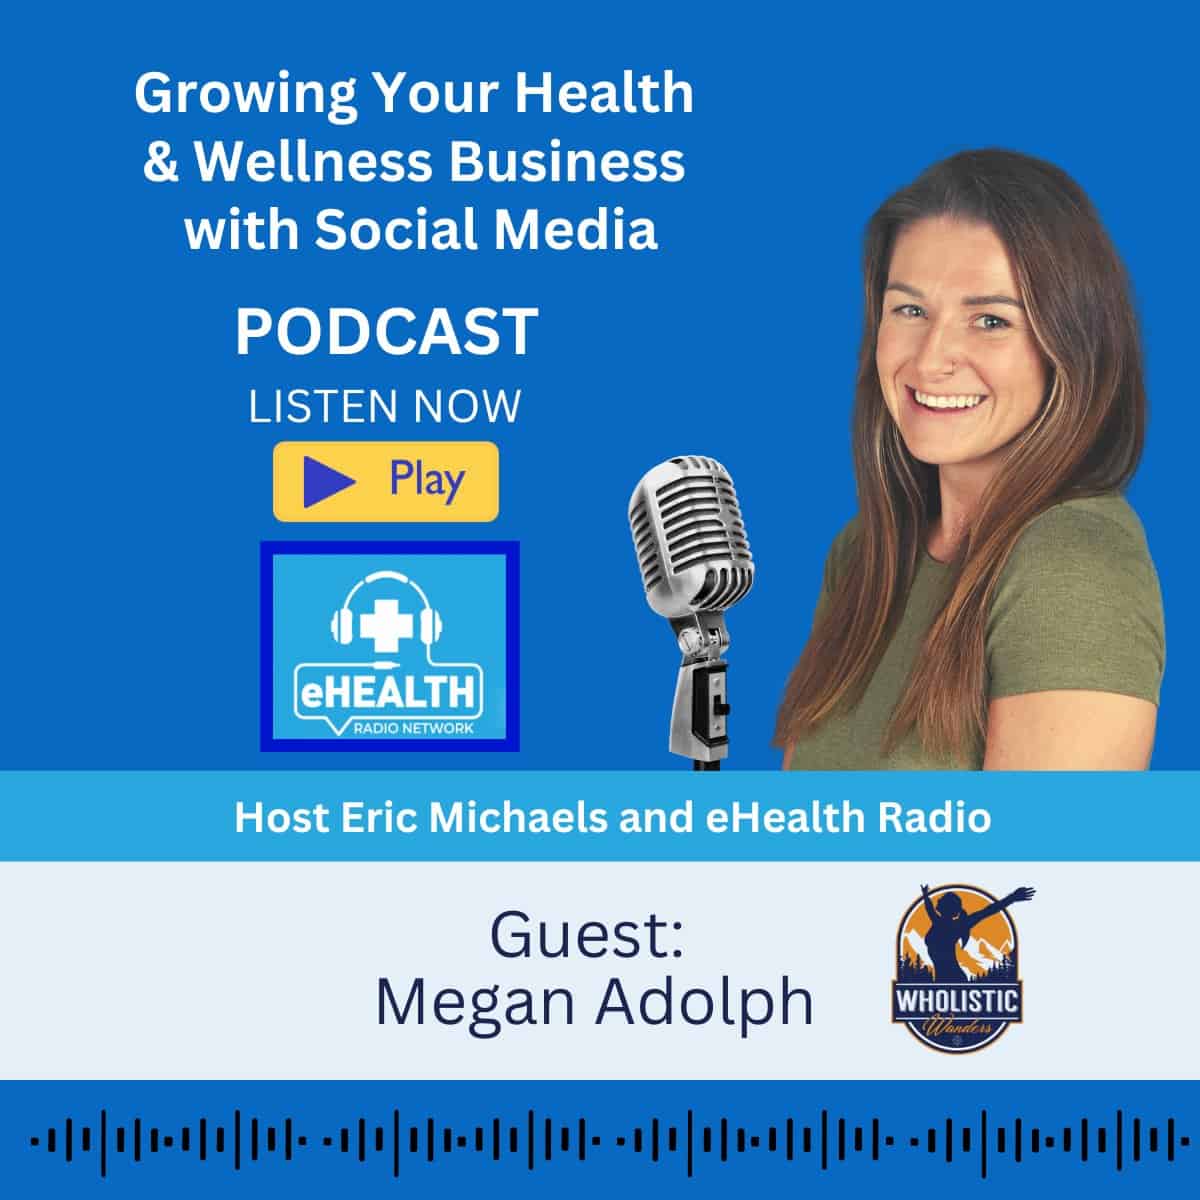 Growing Your Health & Wellness Business with Social Media Podcast